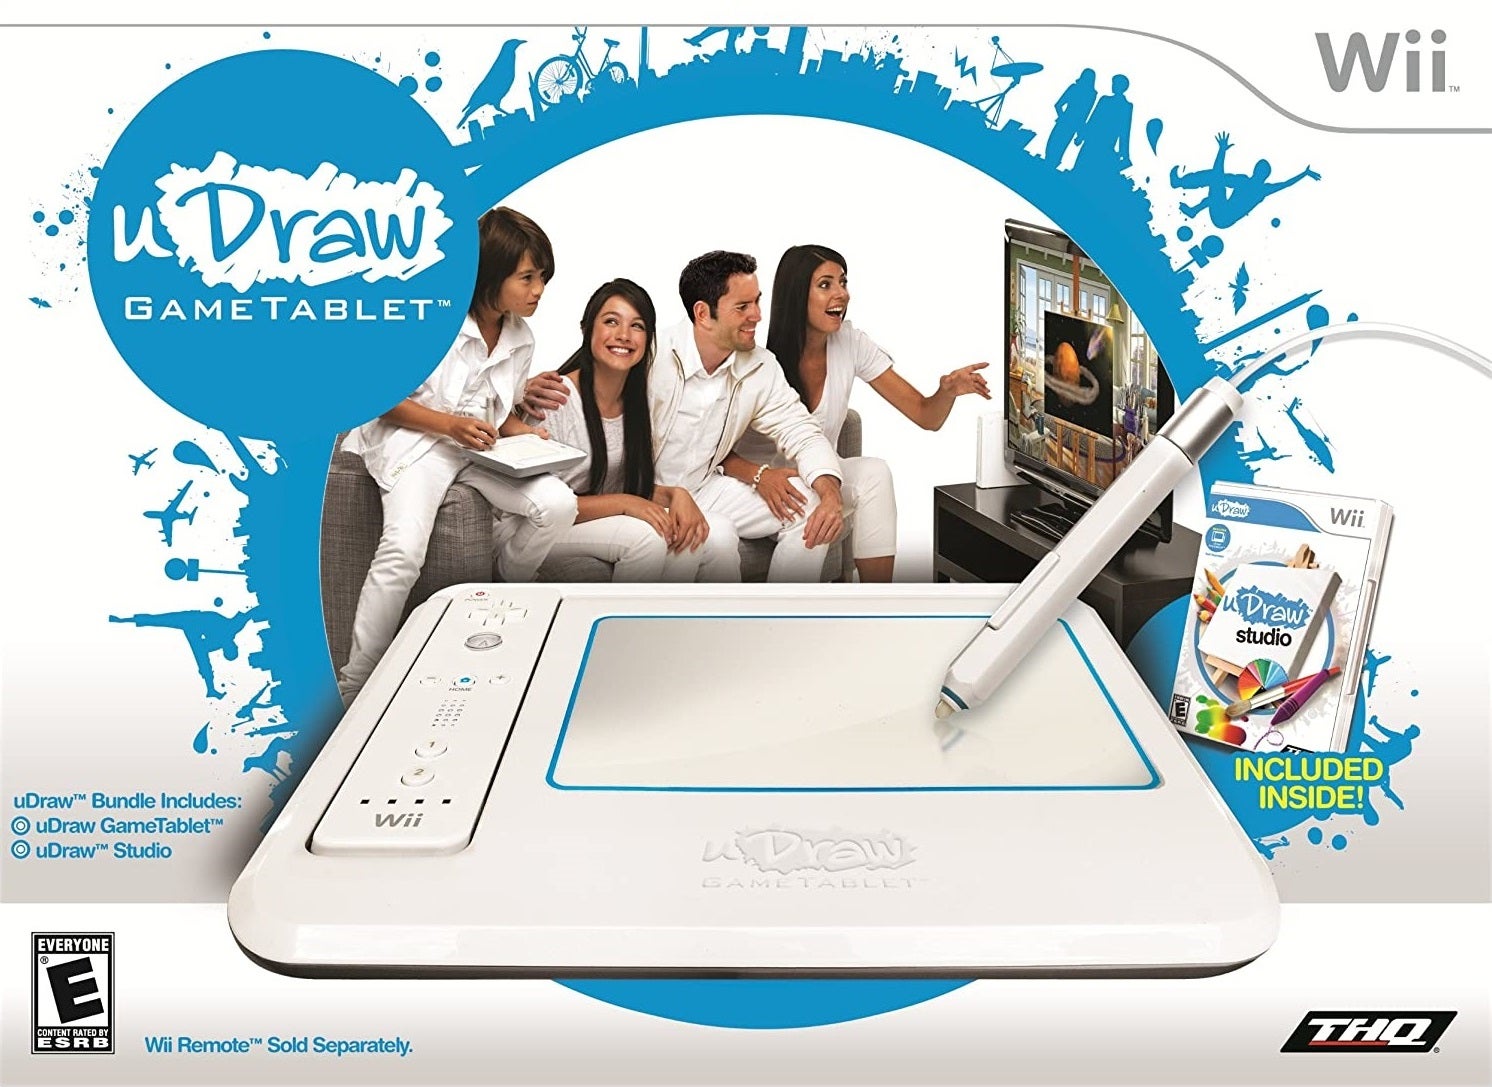 Box for Wii version of THQ's uDraw